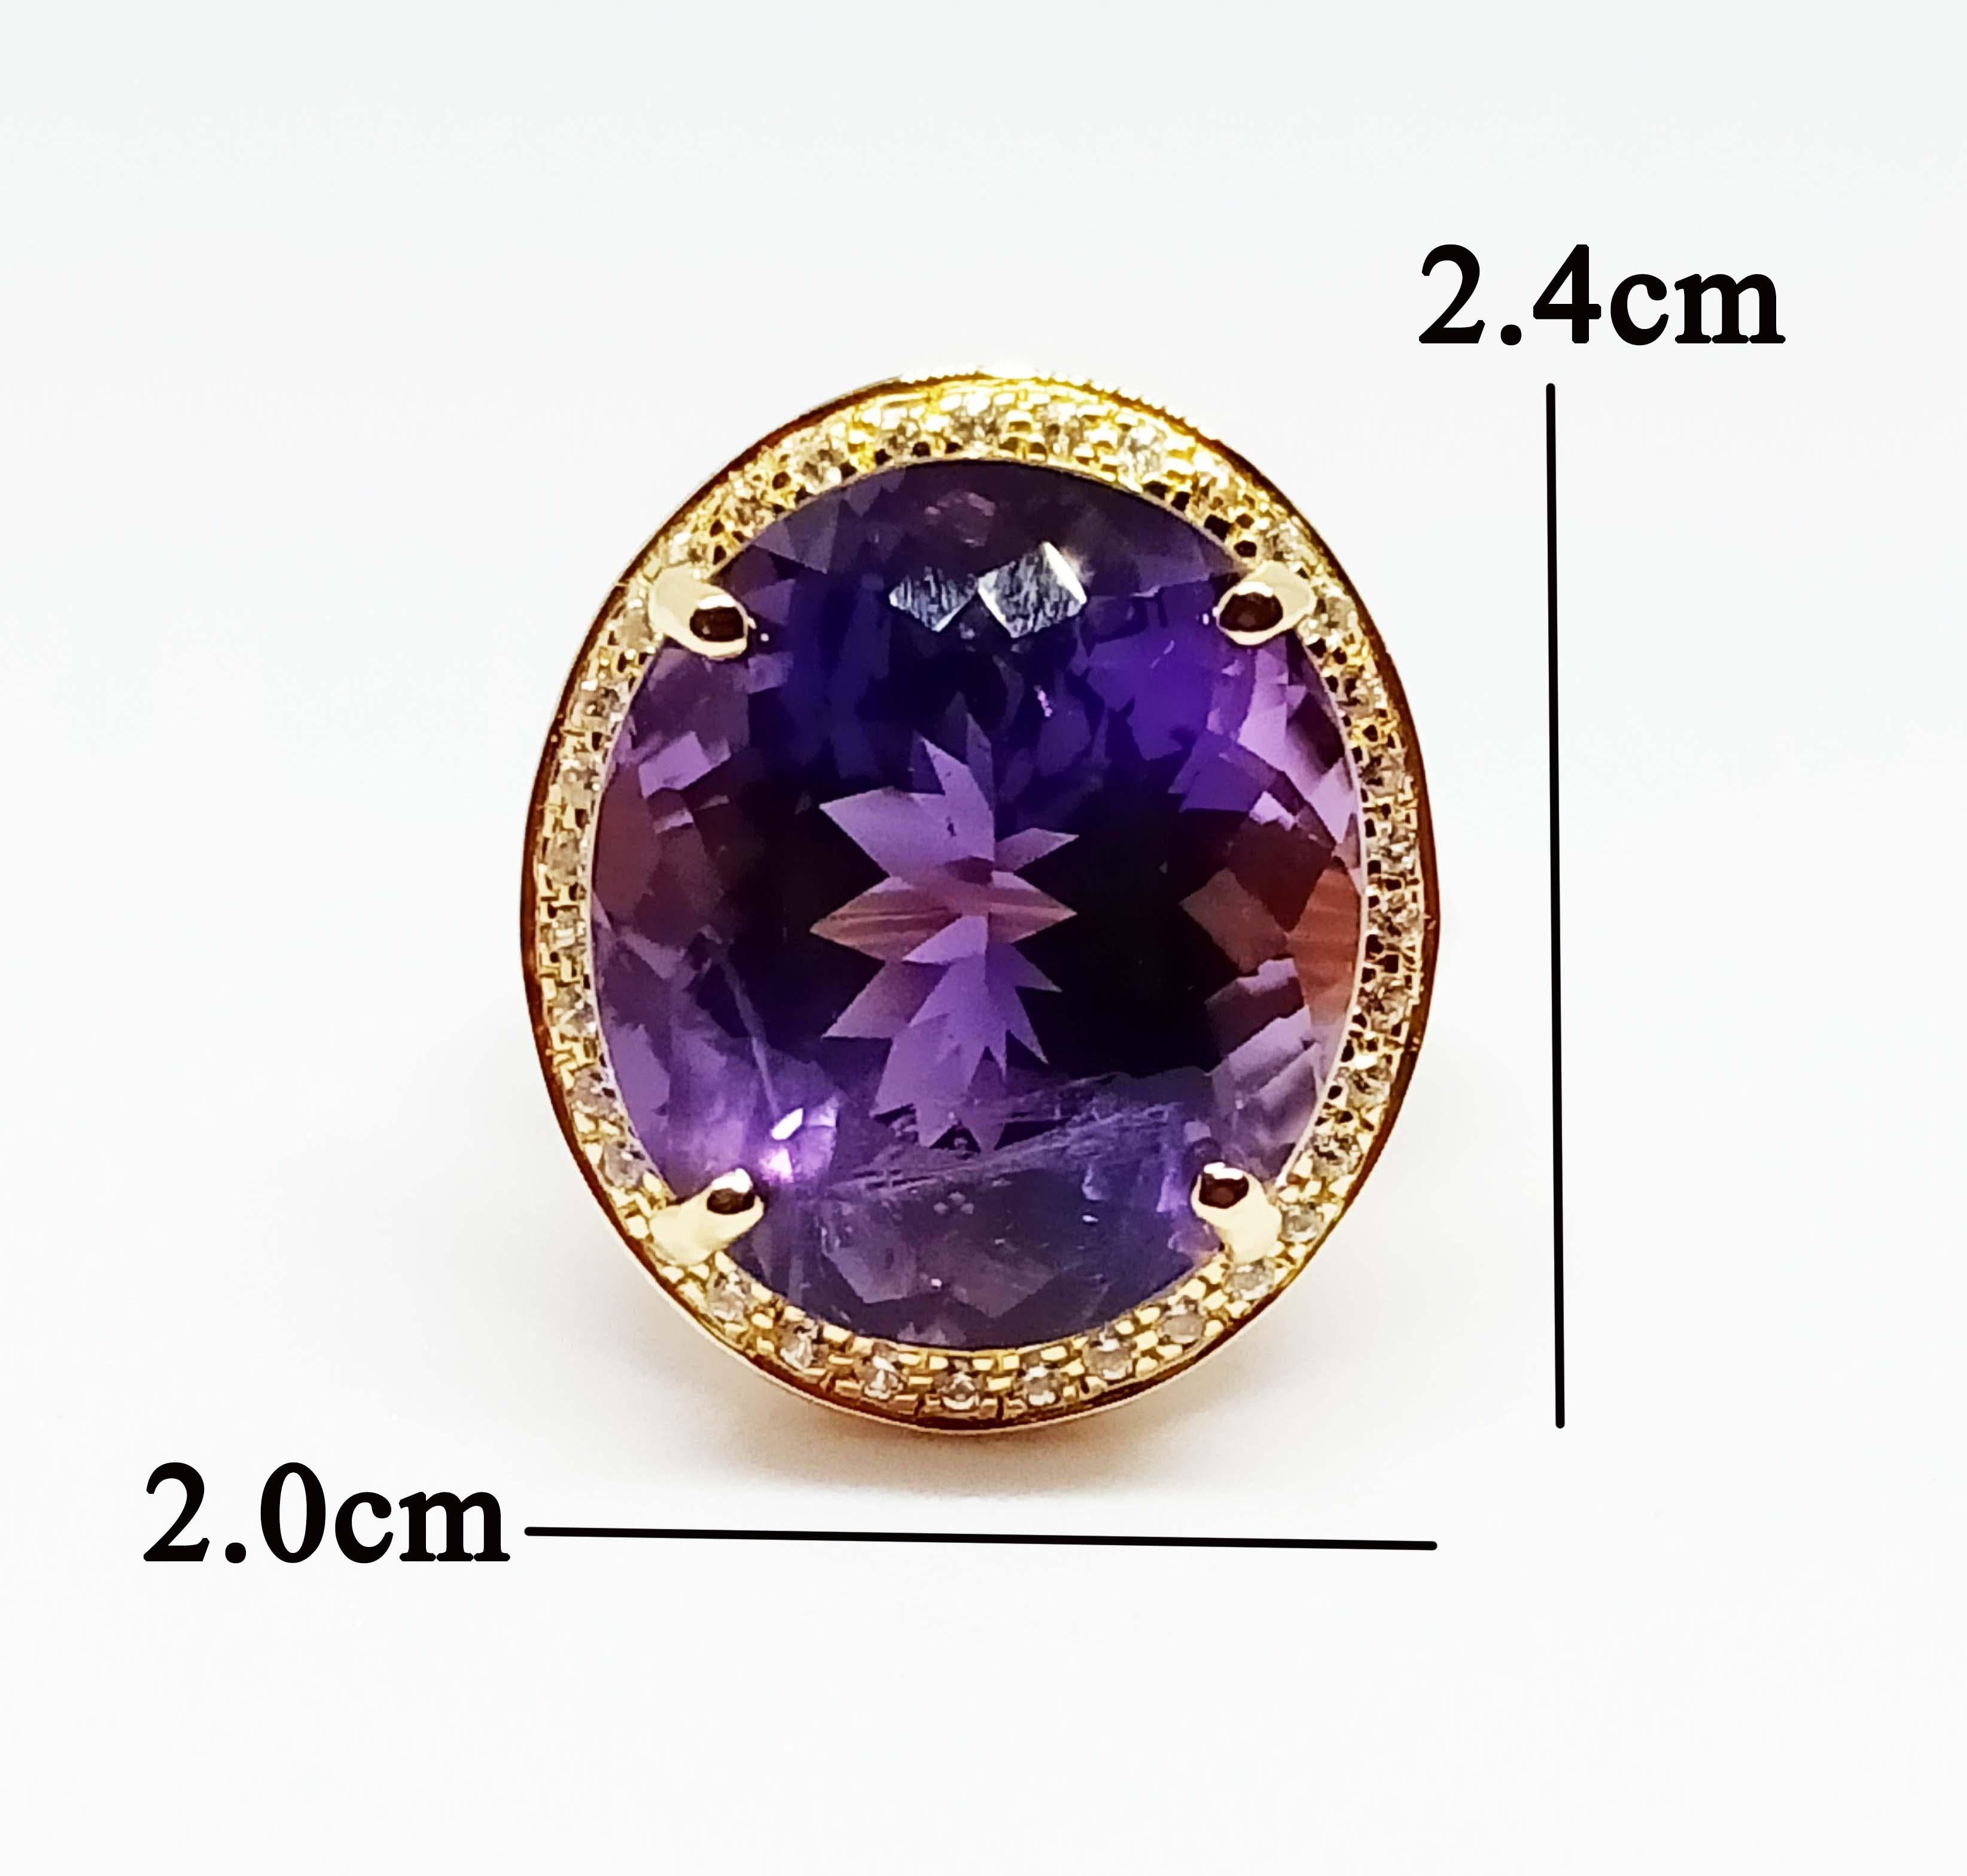 Amethyst Oval 20x16.5 mm. 24.45 cts
White zircon 1.25 mm. 35 pcs.
Sterling silver in 18K Gold Plated.
Size 7.75 us.